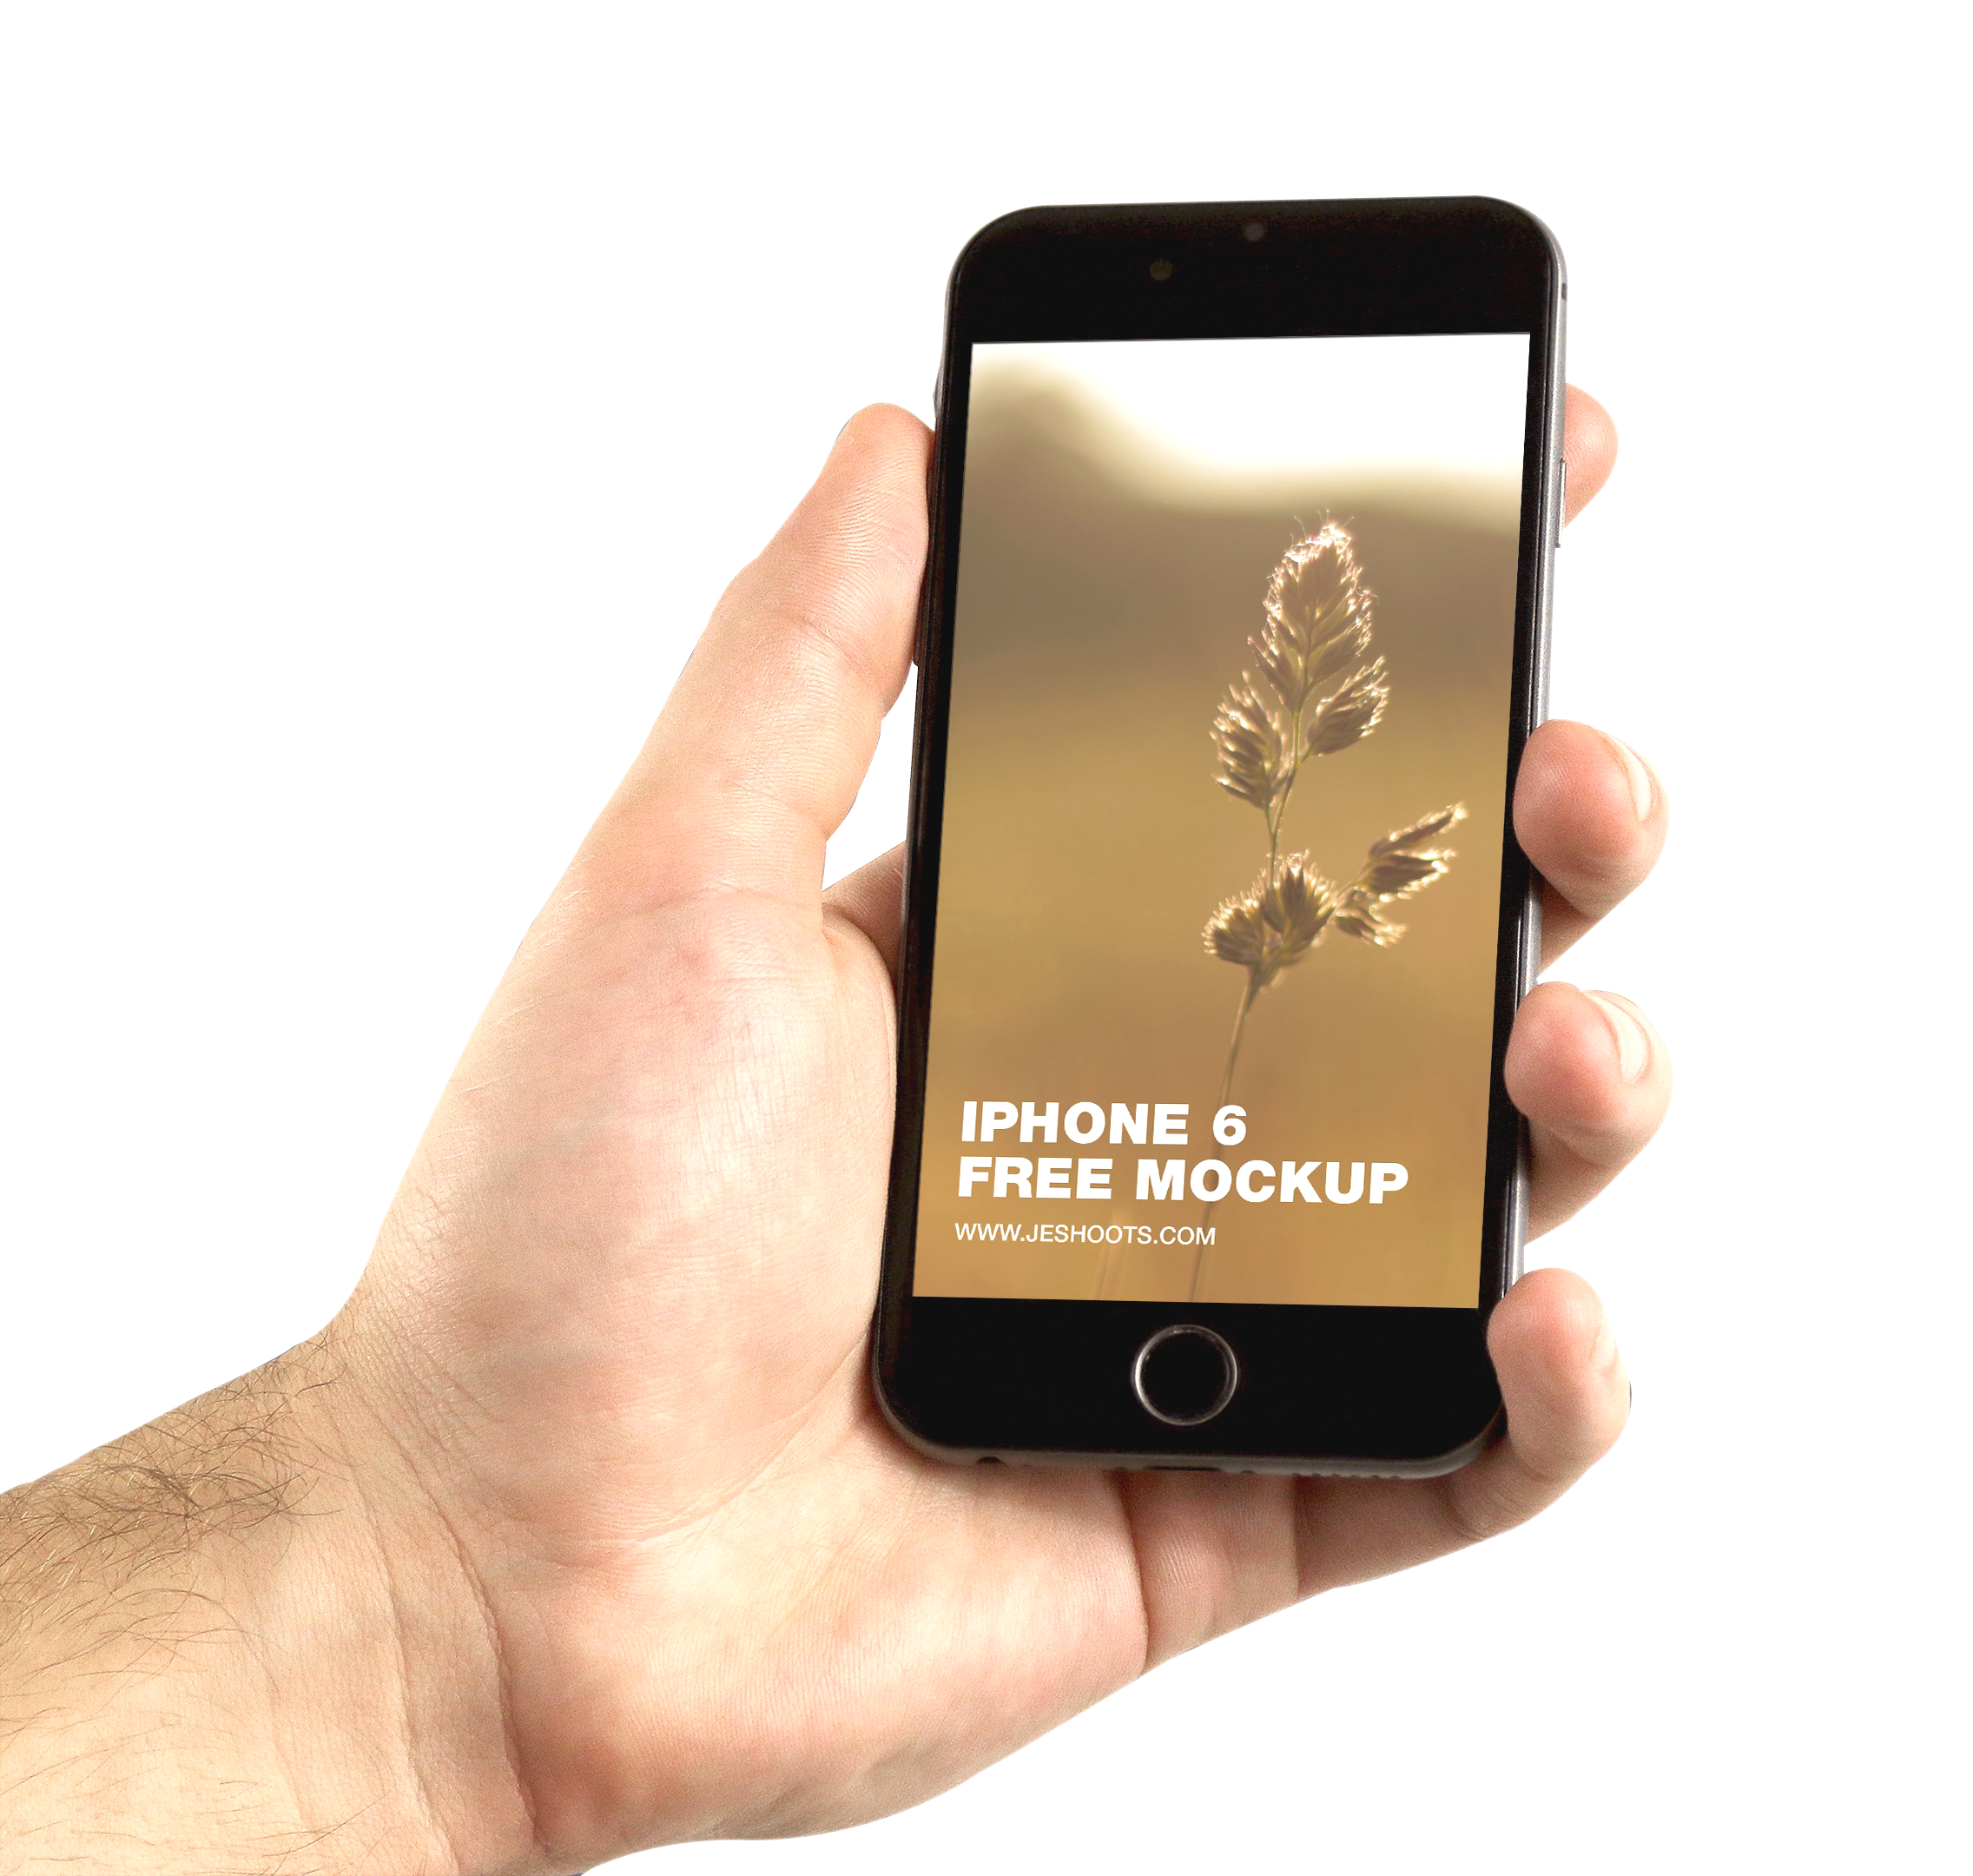 Phone in hand PNG image free Download 